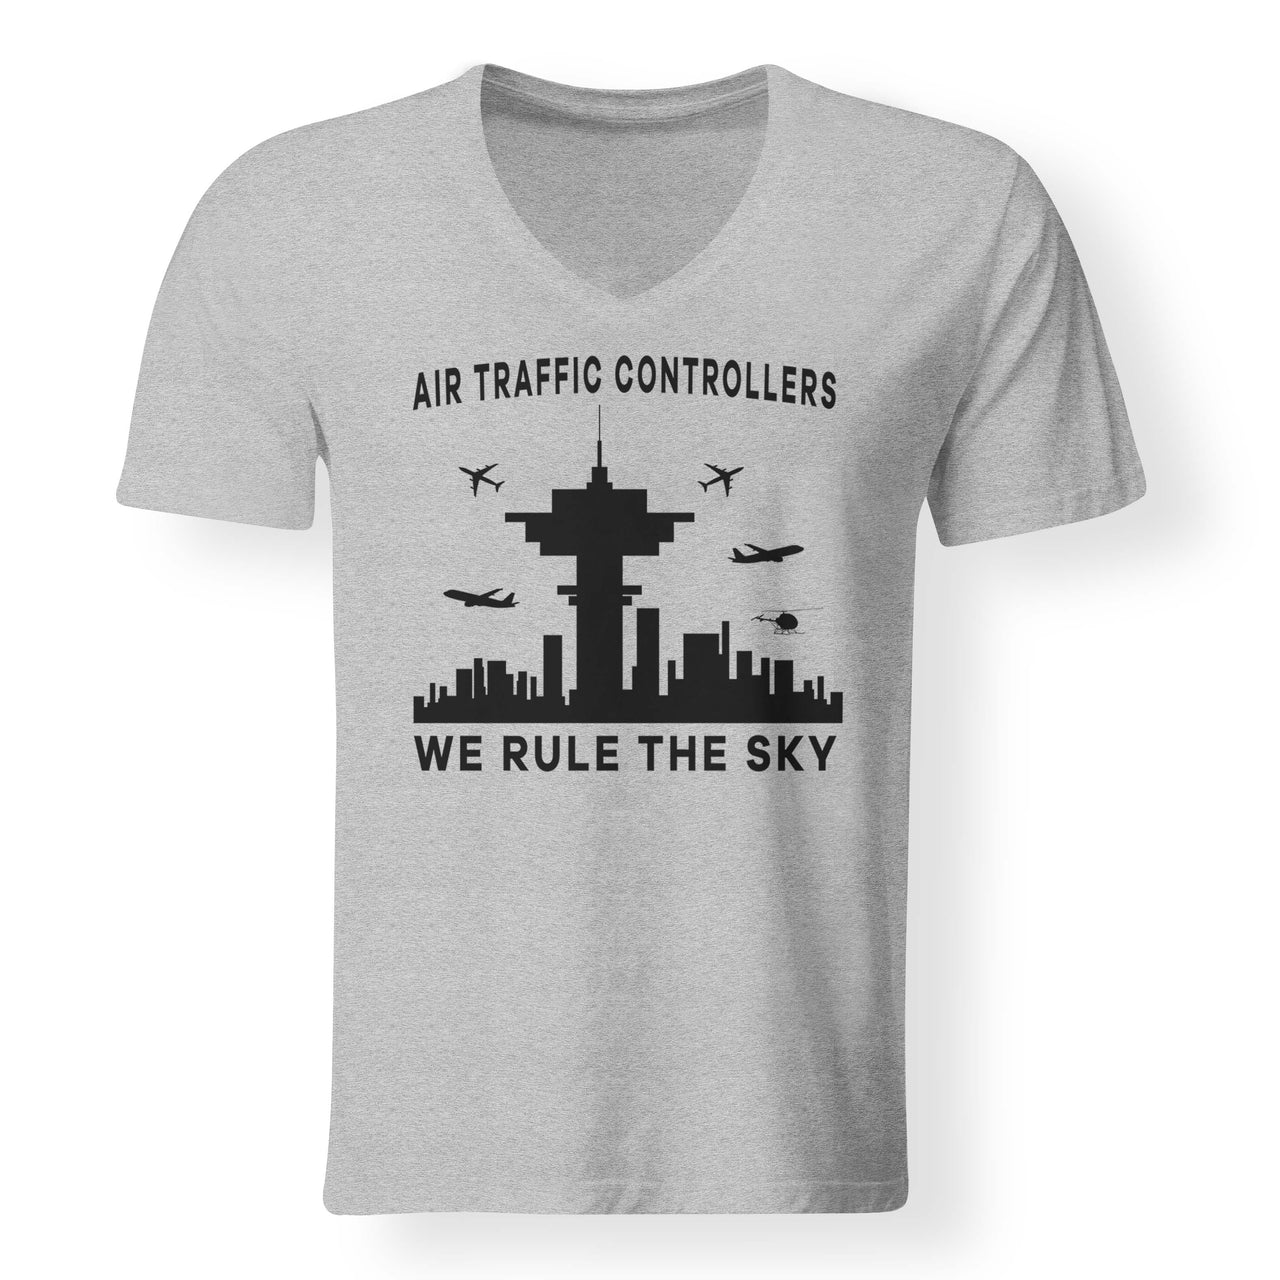 Air Traffic Controllers - We Rule The Sky Designed V-Neck T-Shirts